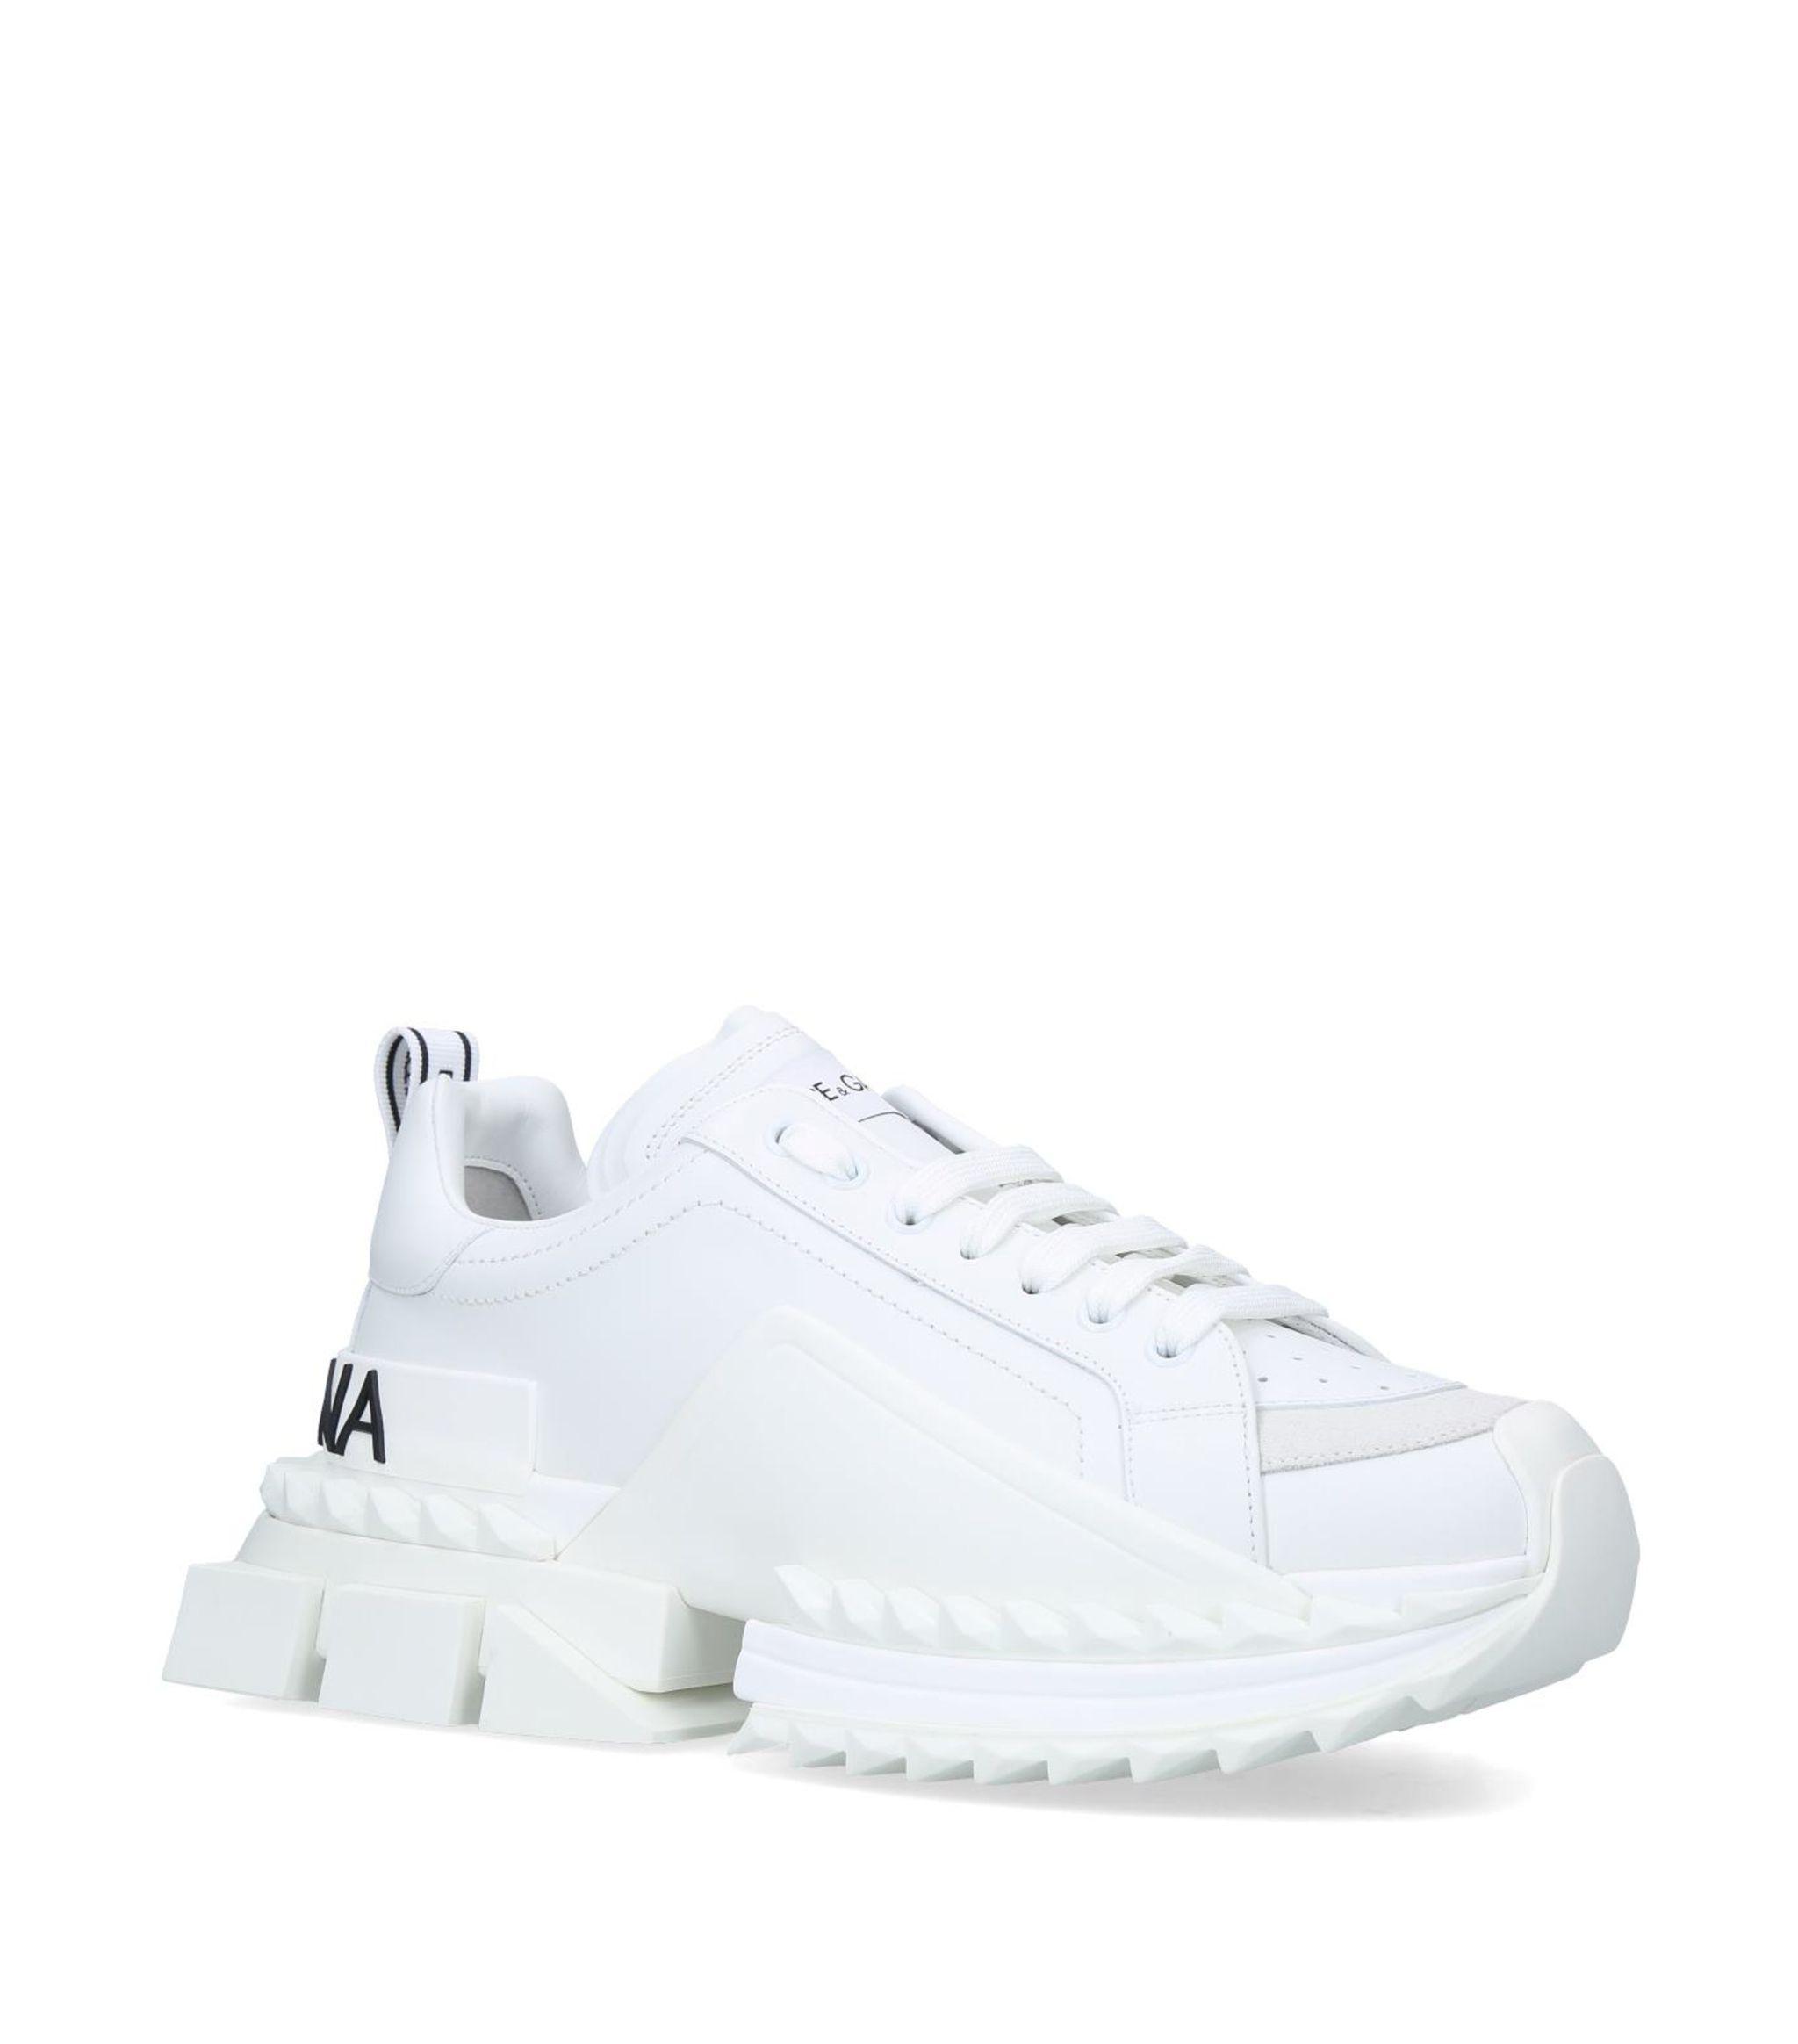 Dolce & Gabbana Super King Sneakers in White for Men - Save 1% - Lyst